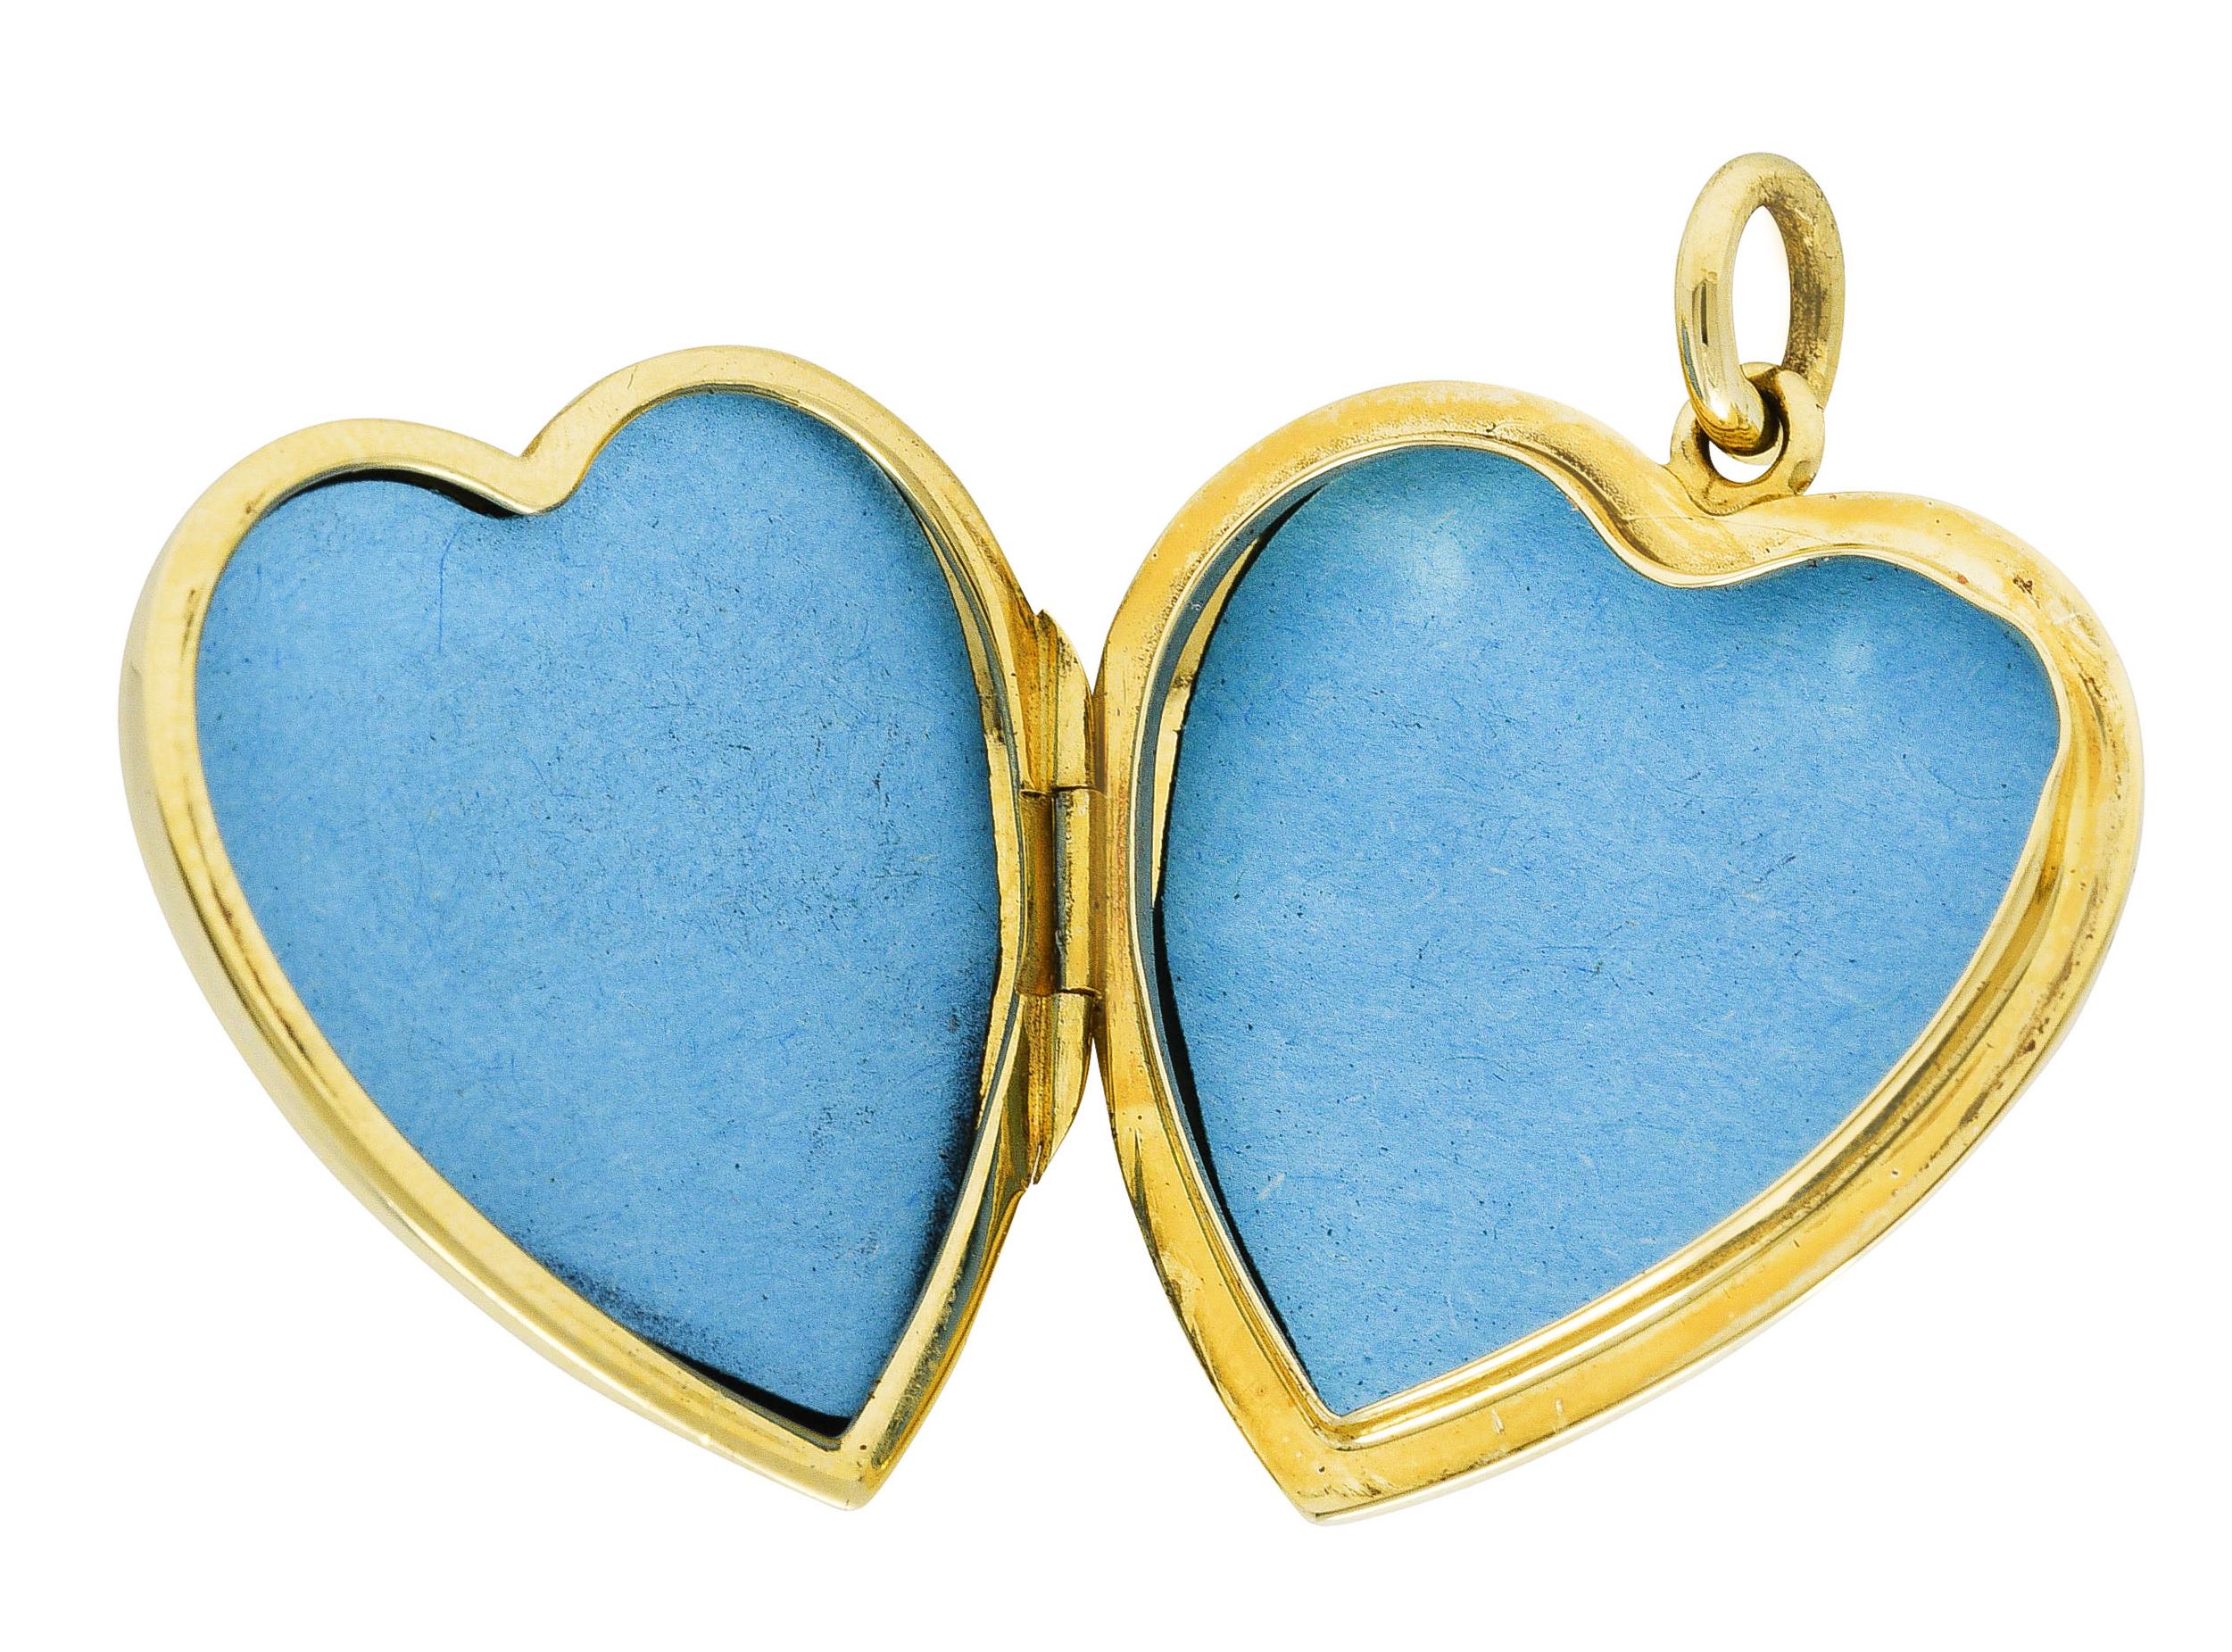 Pendant is designed as a puffed high polished gold heart. Opens on a hinge to reveal two heart shaped recesses with blue paper lining. Completed by jump ring bale. Stamped 585 for 18 karat gold. Fully signed Tiffany & Co. Italy. Circa: 1960's.